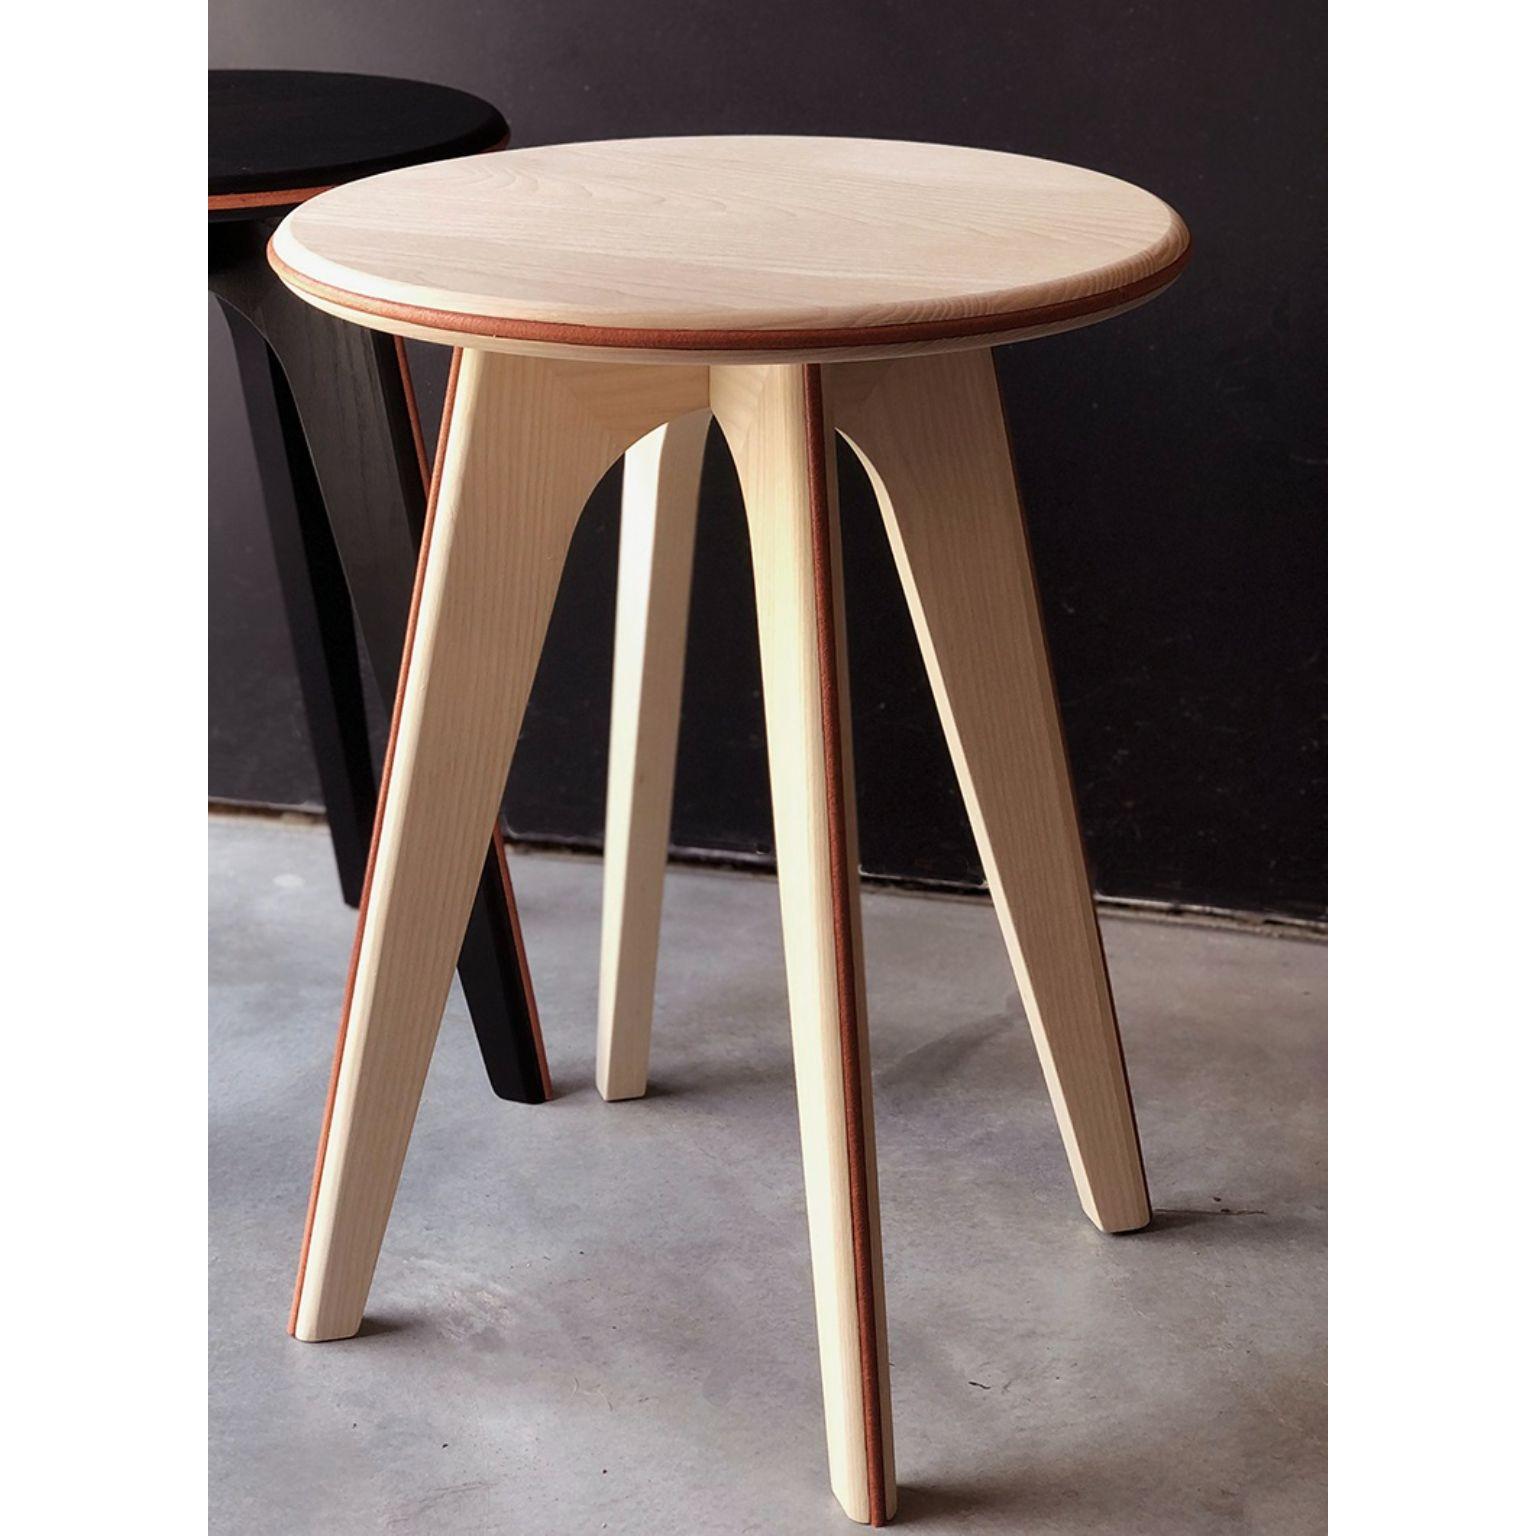 Bleached Ash and Orange Leather Stool by Mademoiselle Jo
Dimensions: Ø 35 x H 46 cm.
Materials: Bleached ash and orange leather.

Available in two wood colors and several designs.  Please contact us.

At the border between design and goldsmithing,